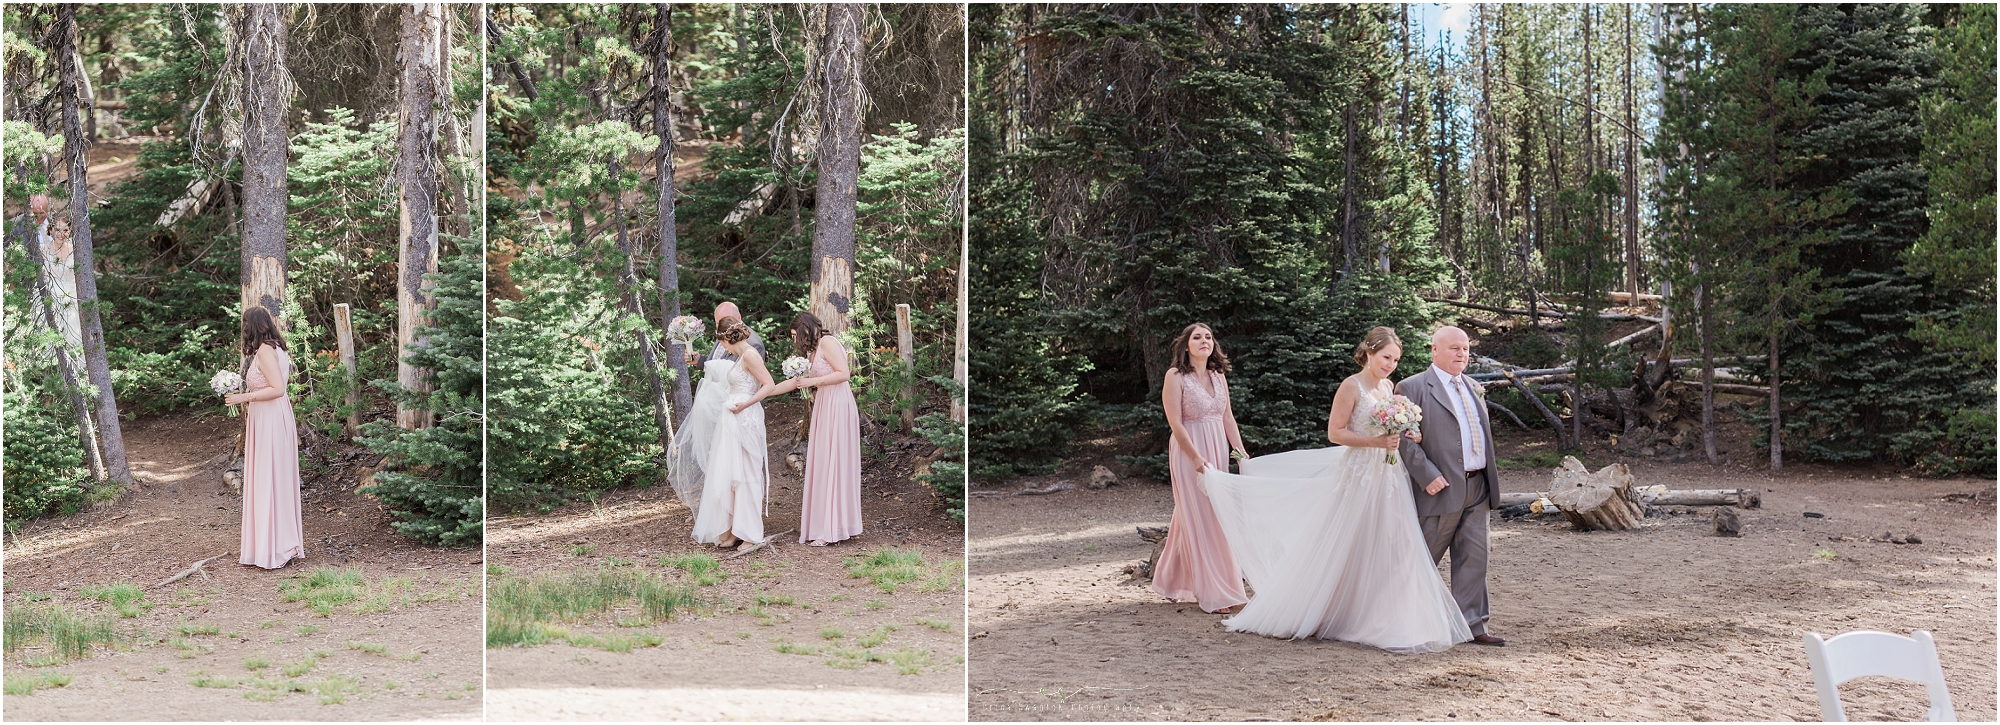 A trail and sandy beach provide the perfect aisle for this intimate outdoor Oregon wedding along Sparks Lake in the Cascade Mountains. 